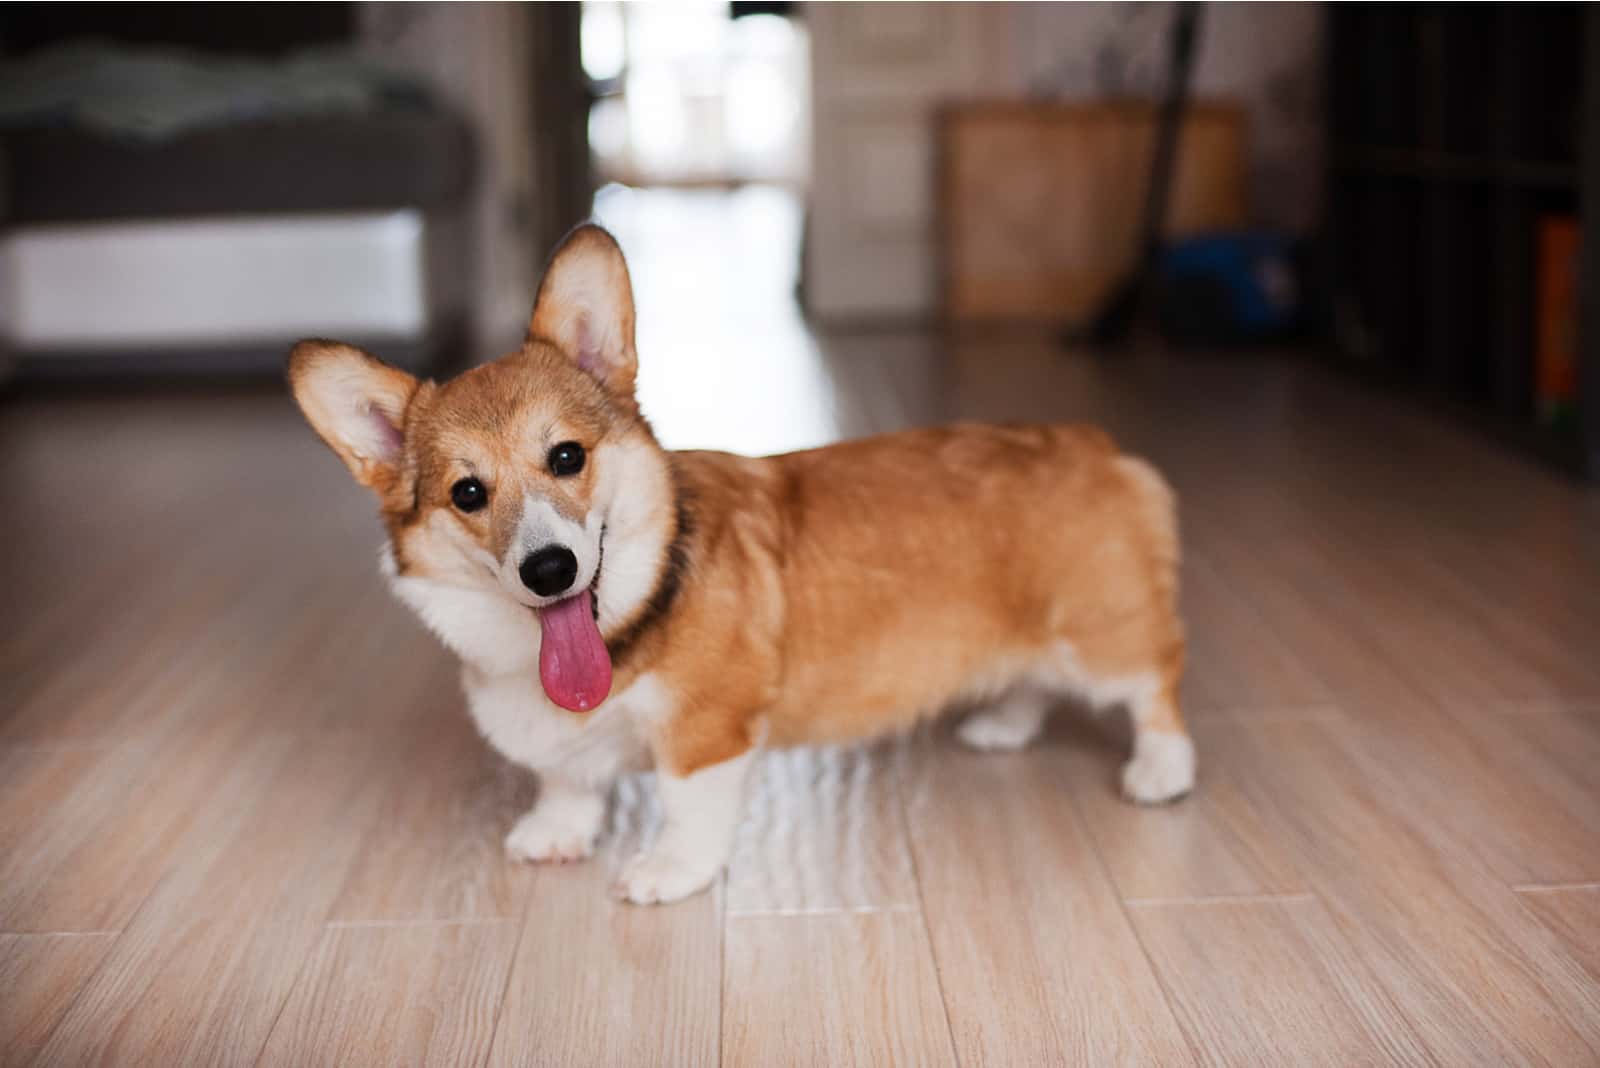 corgi stands in the house and looks curiously in front of him